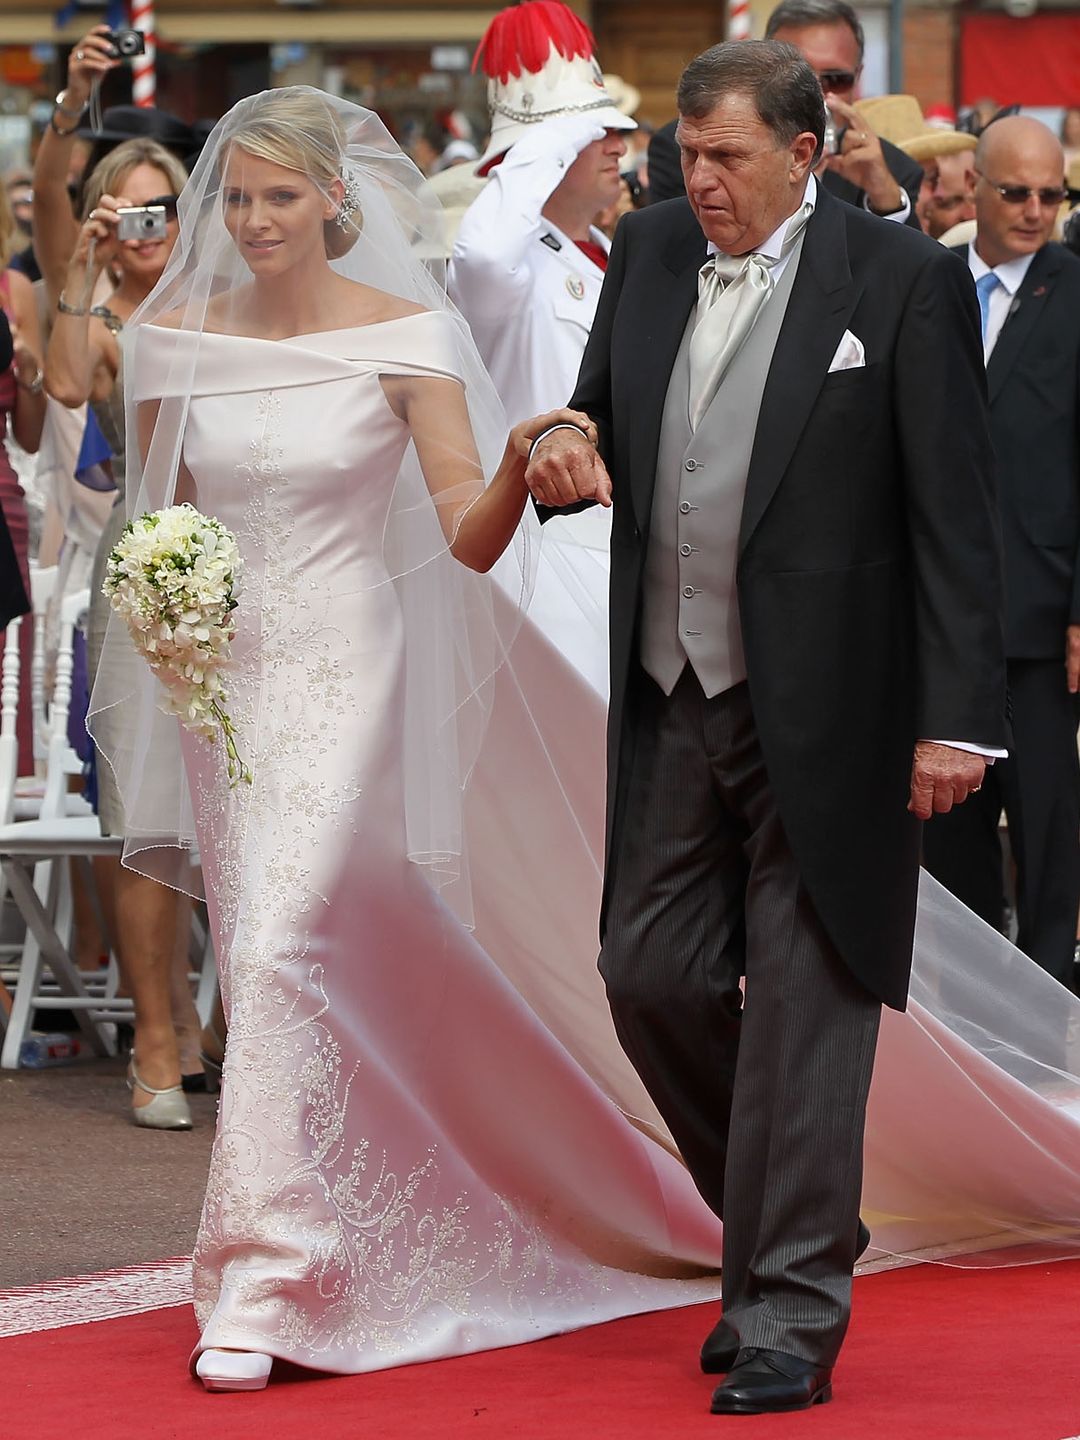 Princess Charlene of Monaco holding hands with Michael Kenneth Wittstock as she walks down the aisle